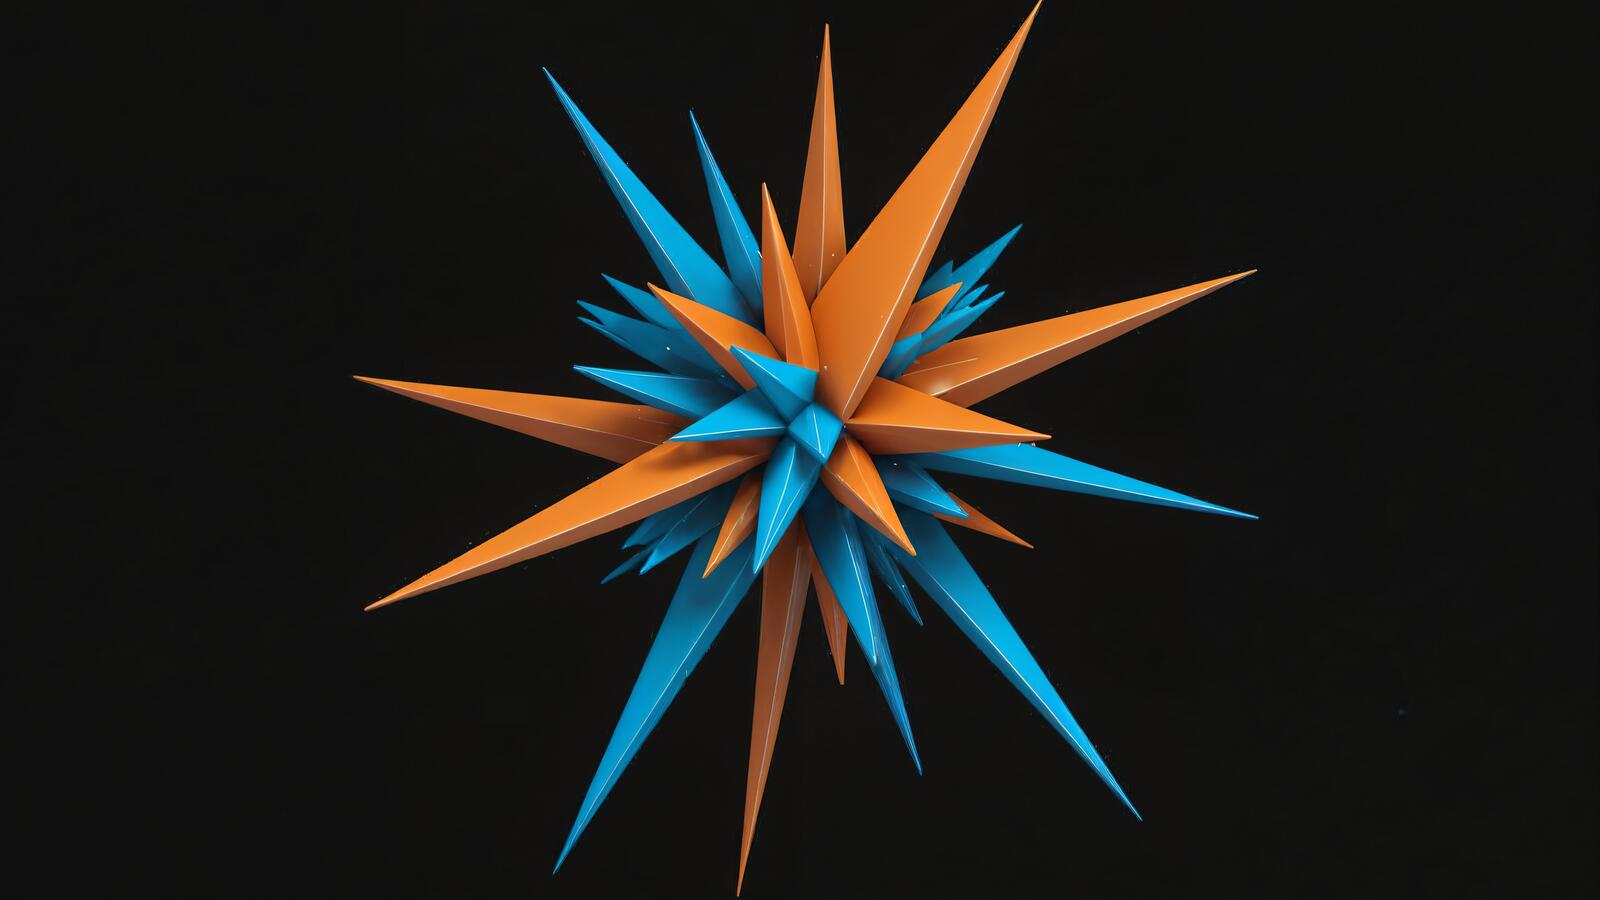 Free photo Vibrating triangles in orange and blue